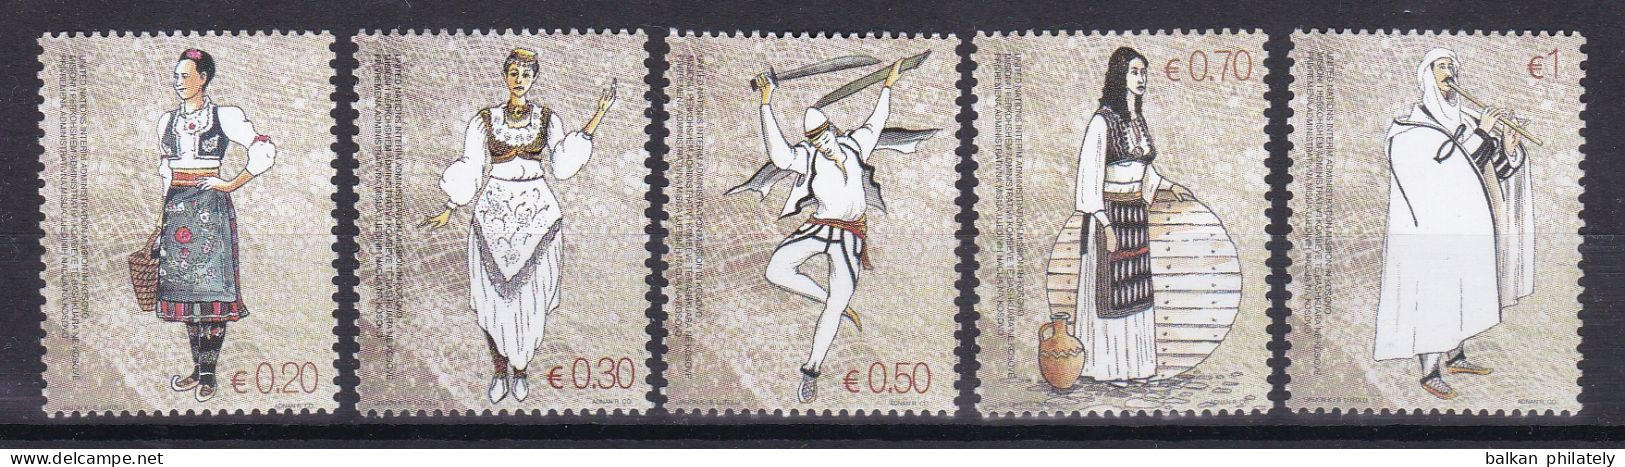 Kosovo 2007 Traditional Costumes Swards Music Instruments Culture UNMIK UN United Nations MNH - Unused Stamps